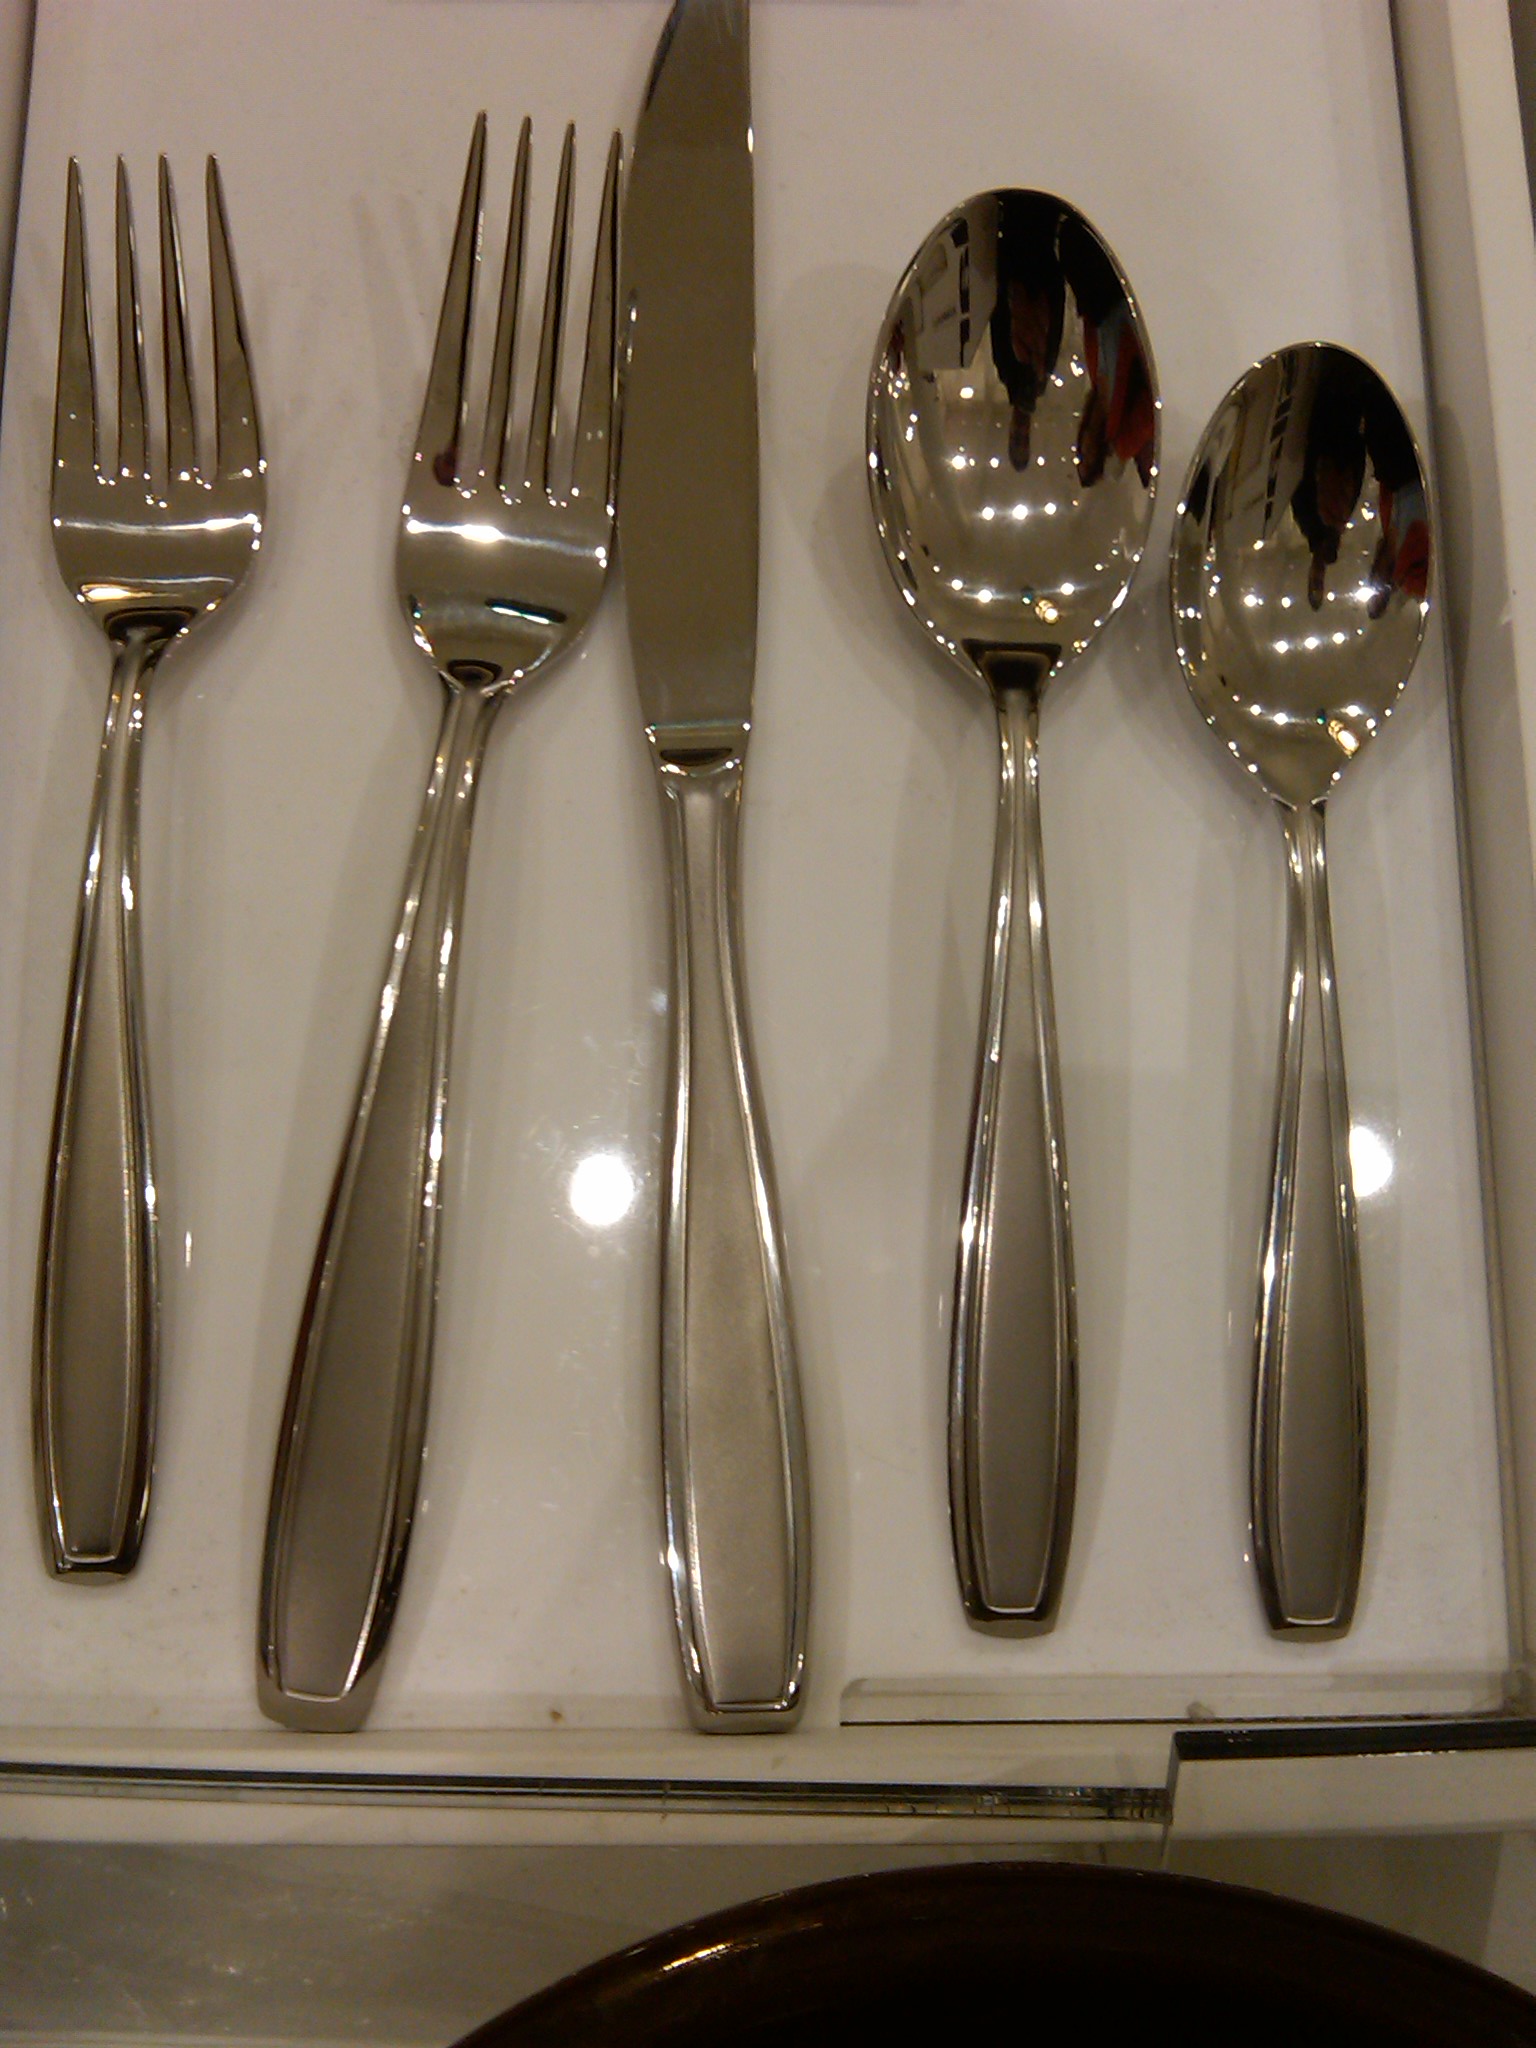 Our new flatware- exciting isn't it? HAHA